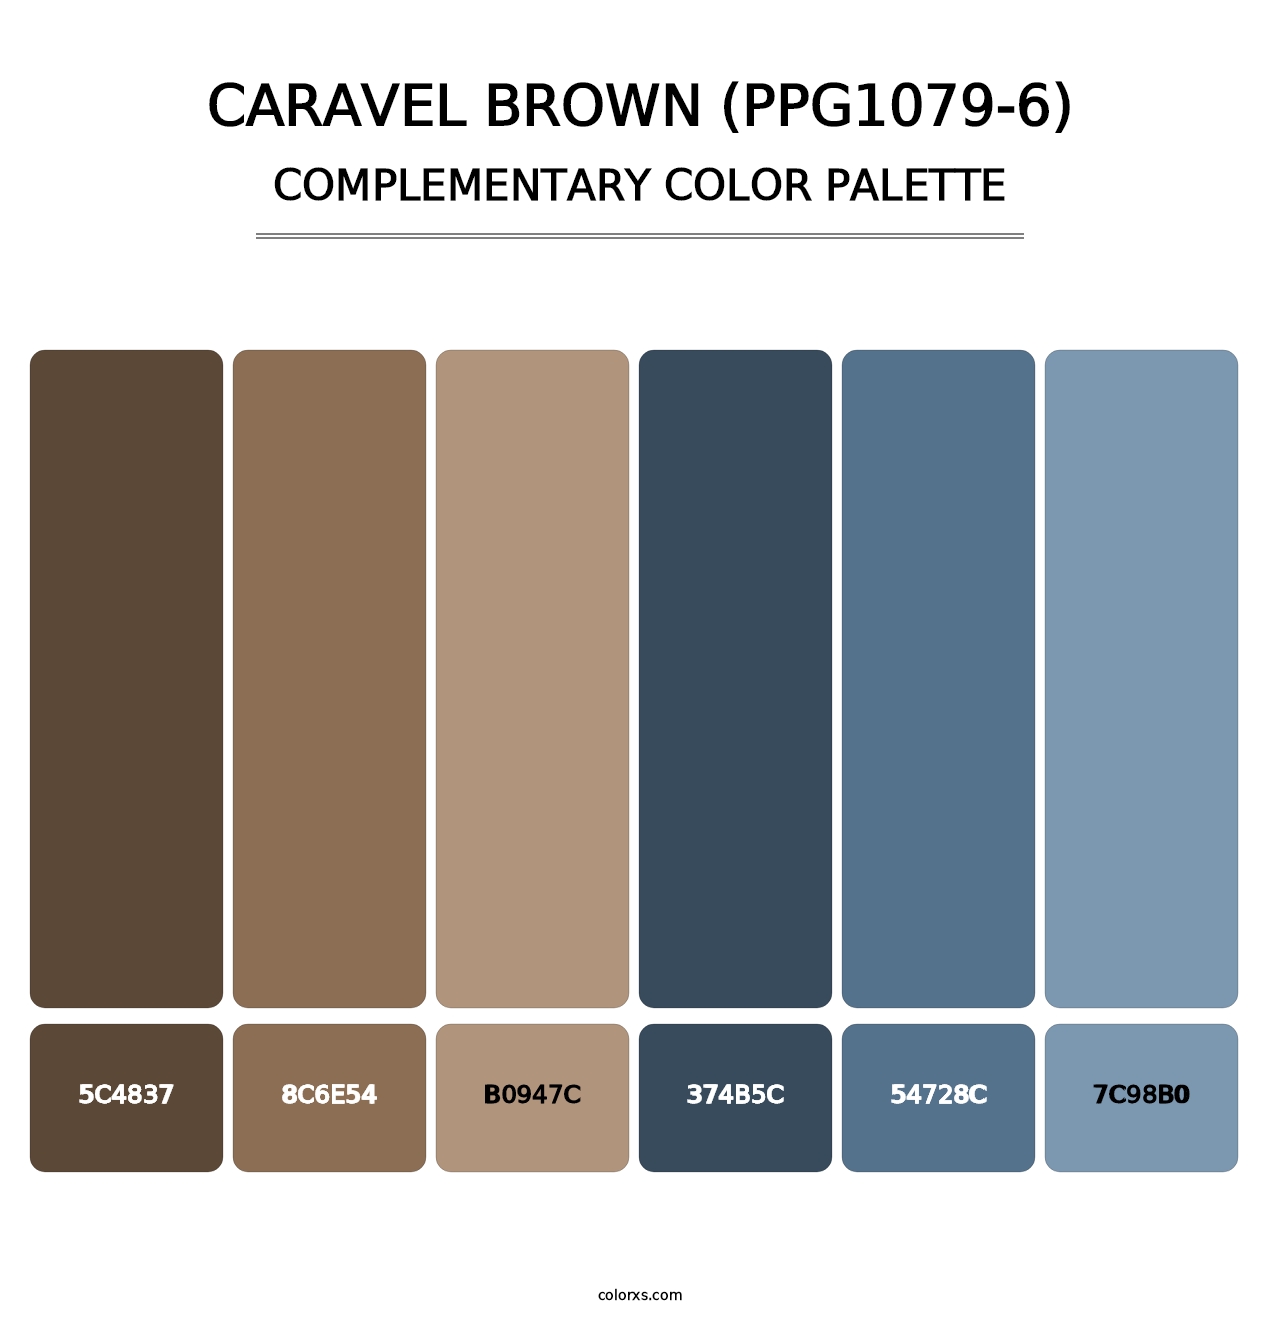 Caravel Brown (PPG1079-6) - Complementary Color Palette